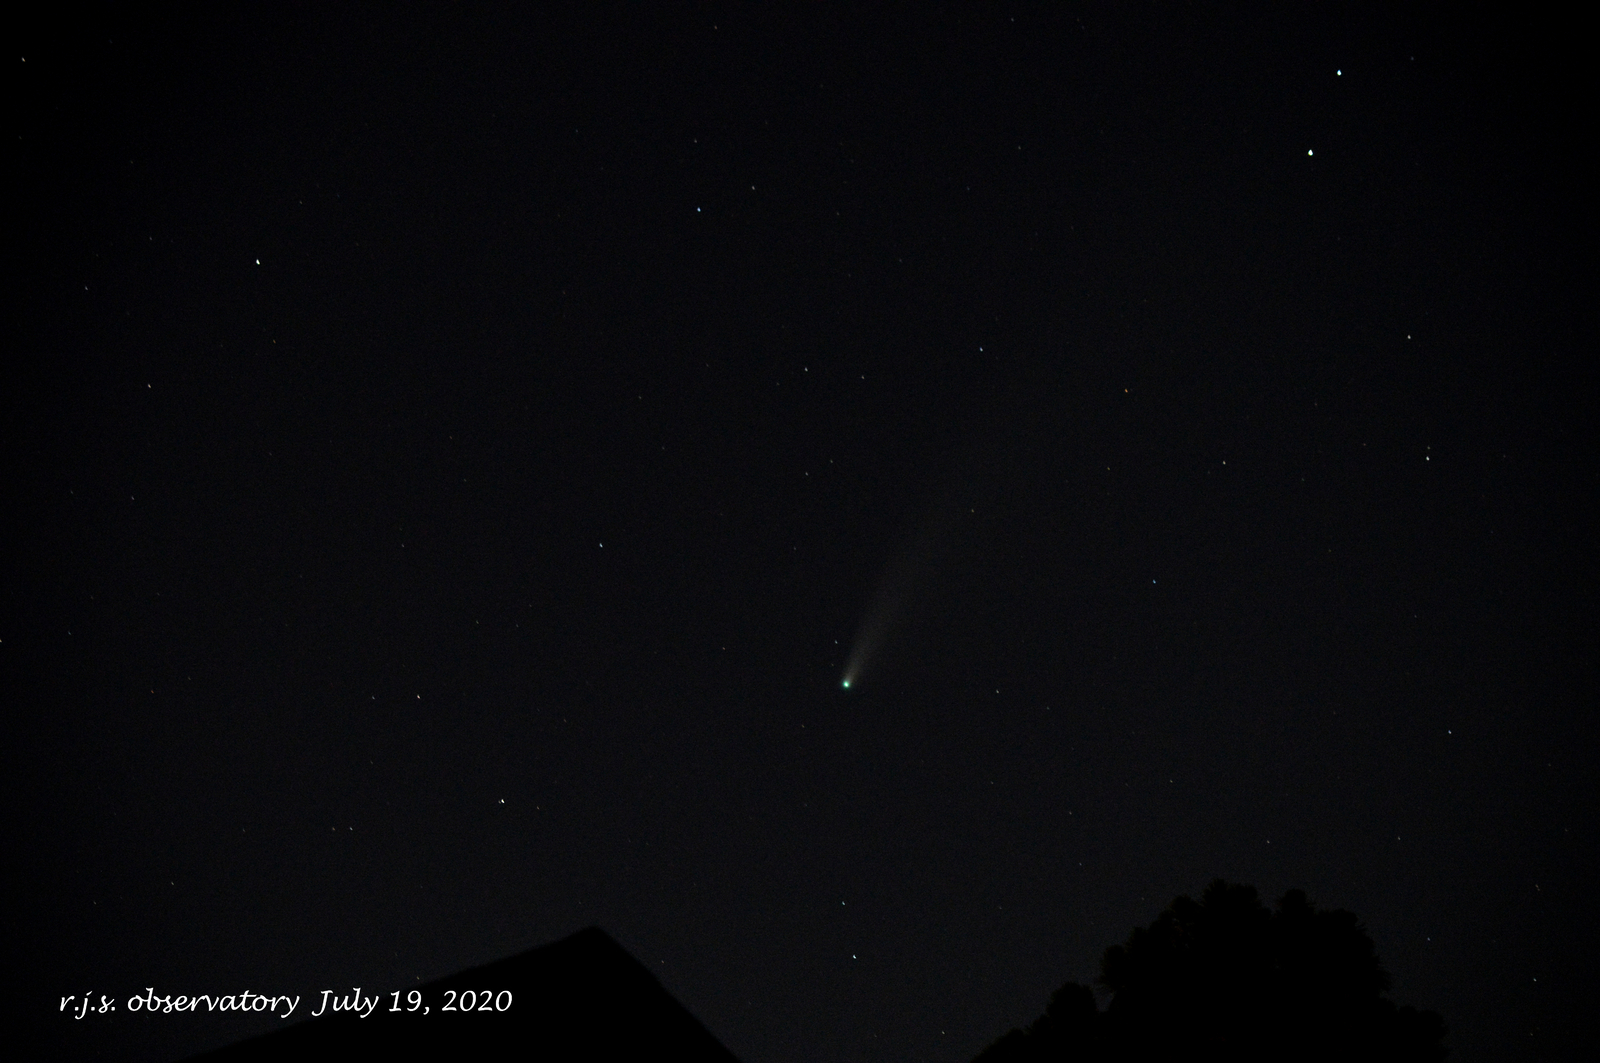 ASTRONOMY - COMET NEOWISE (f5.6, ISO 1600, 5s, 140mm) 7-19-20 FIX.jpg